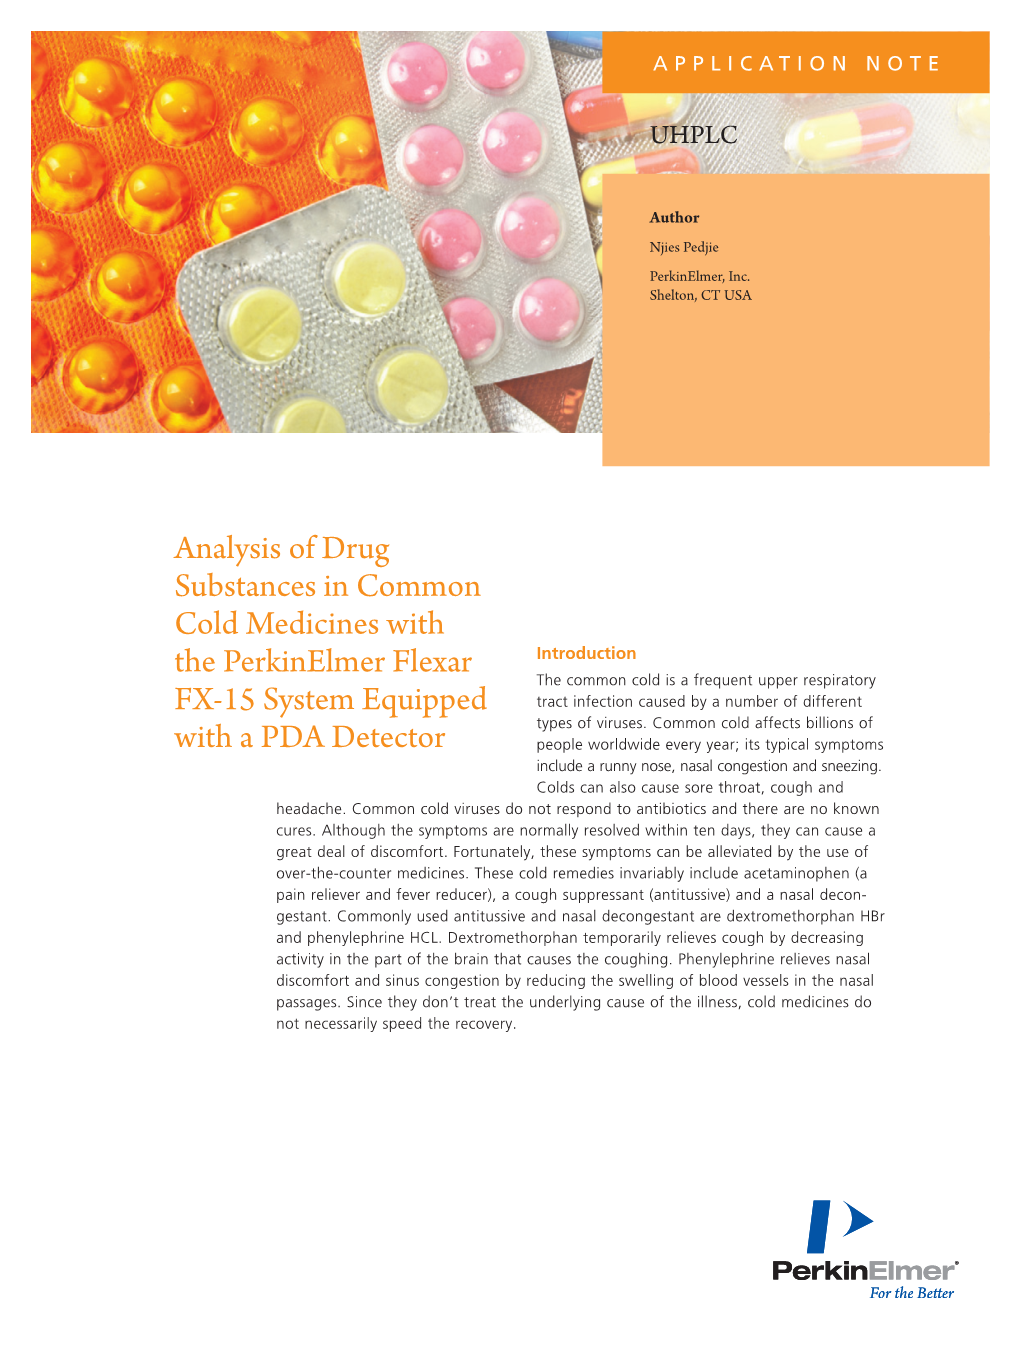 Analysis of Drug Substances in Common Cold Medicines with The